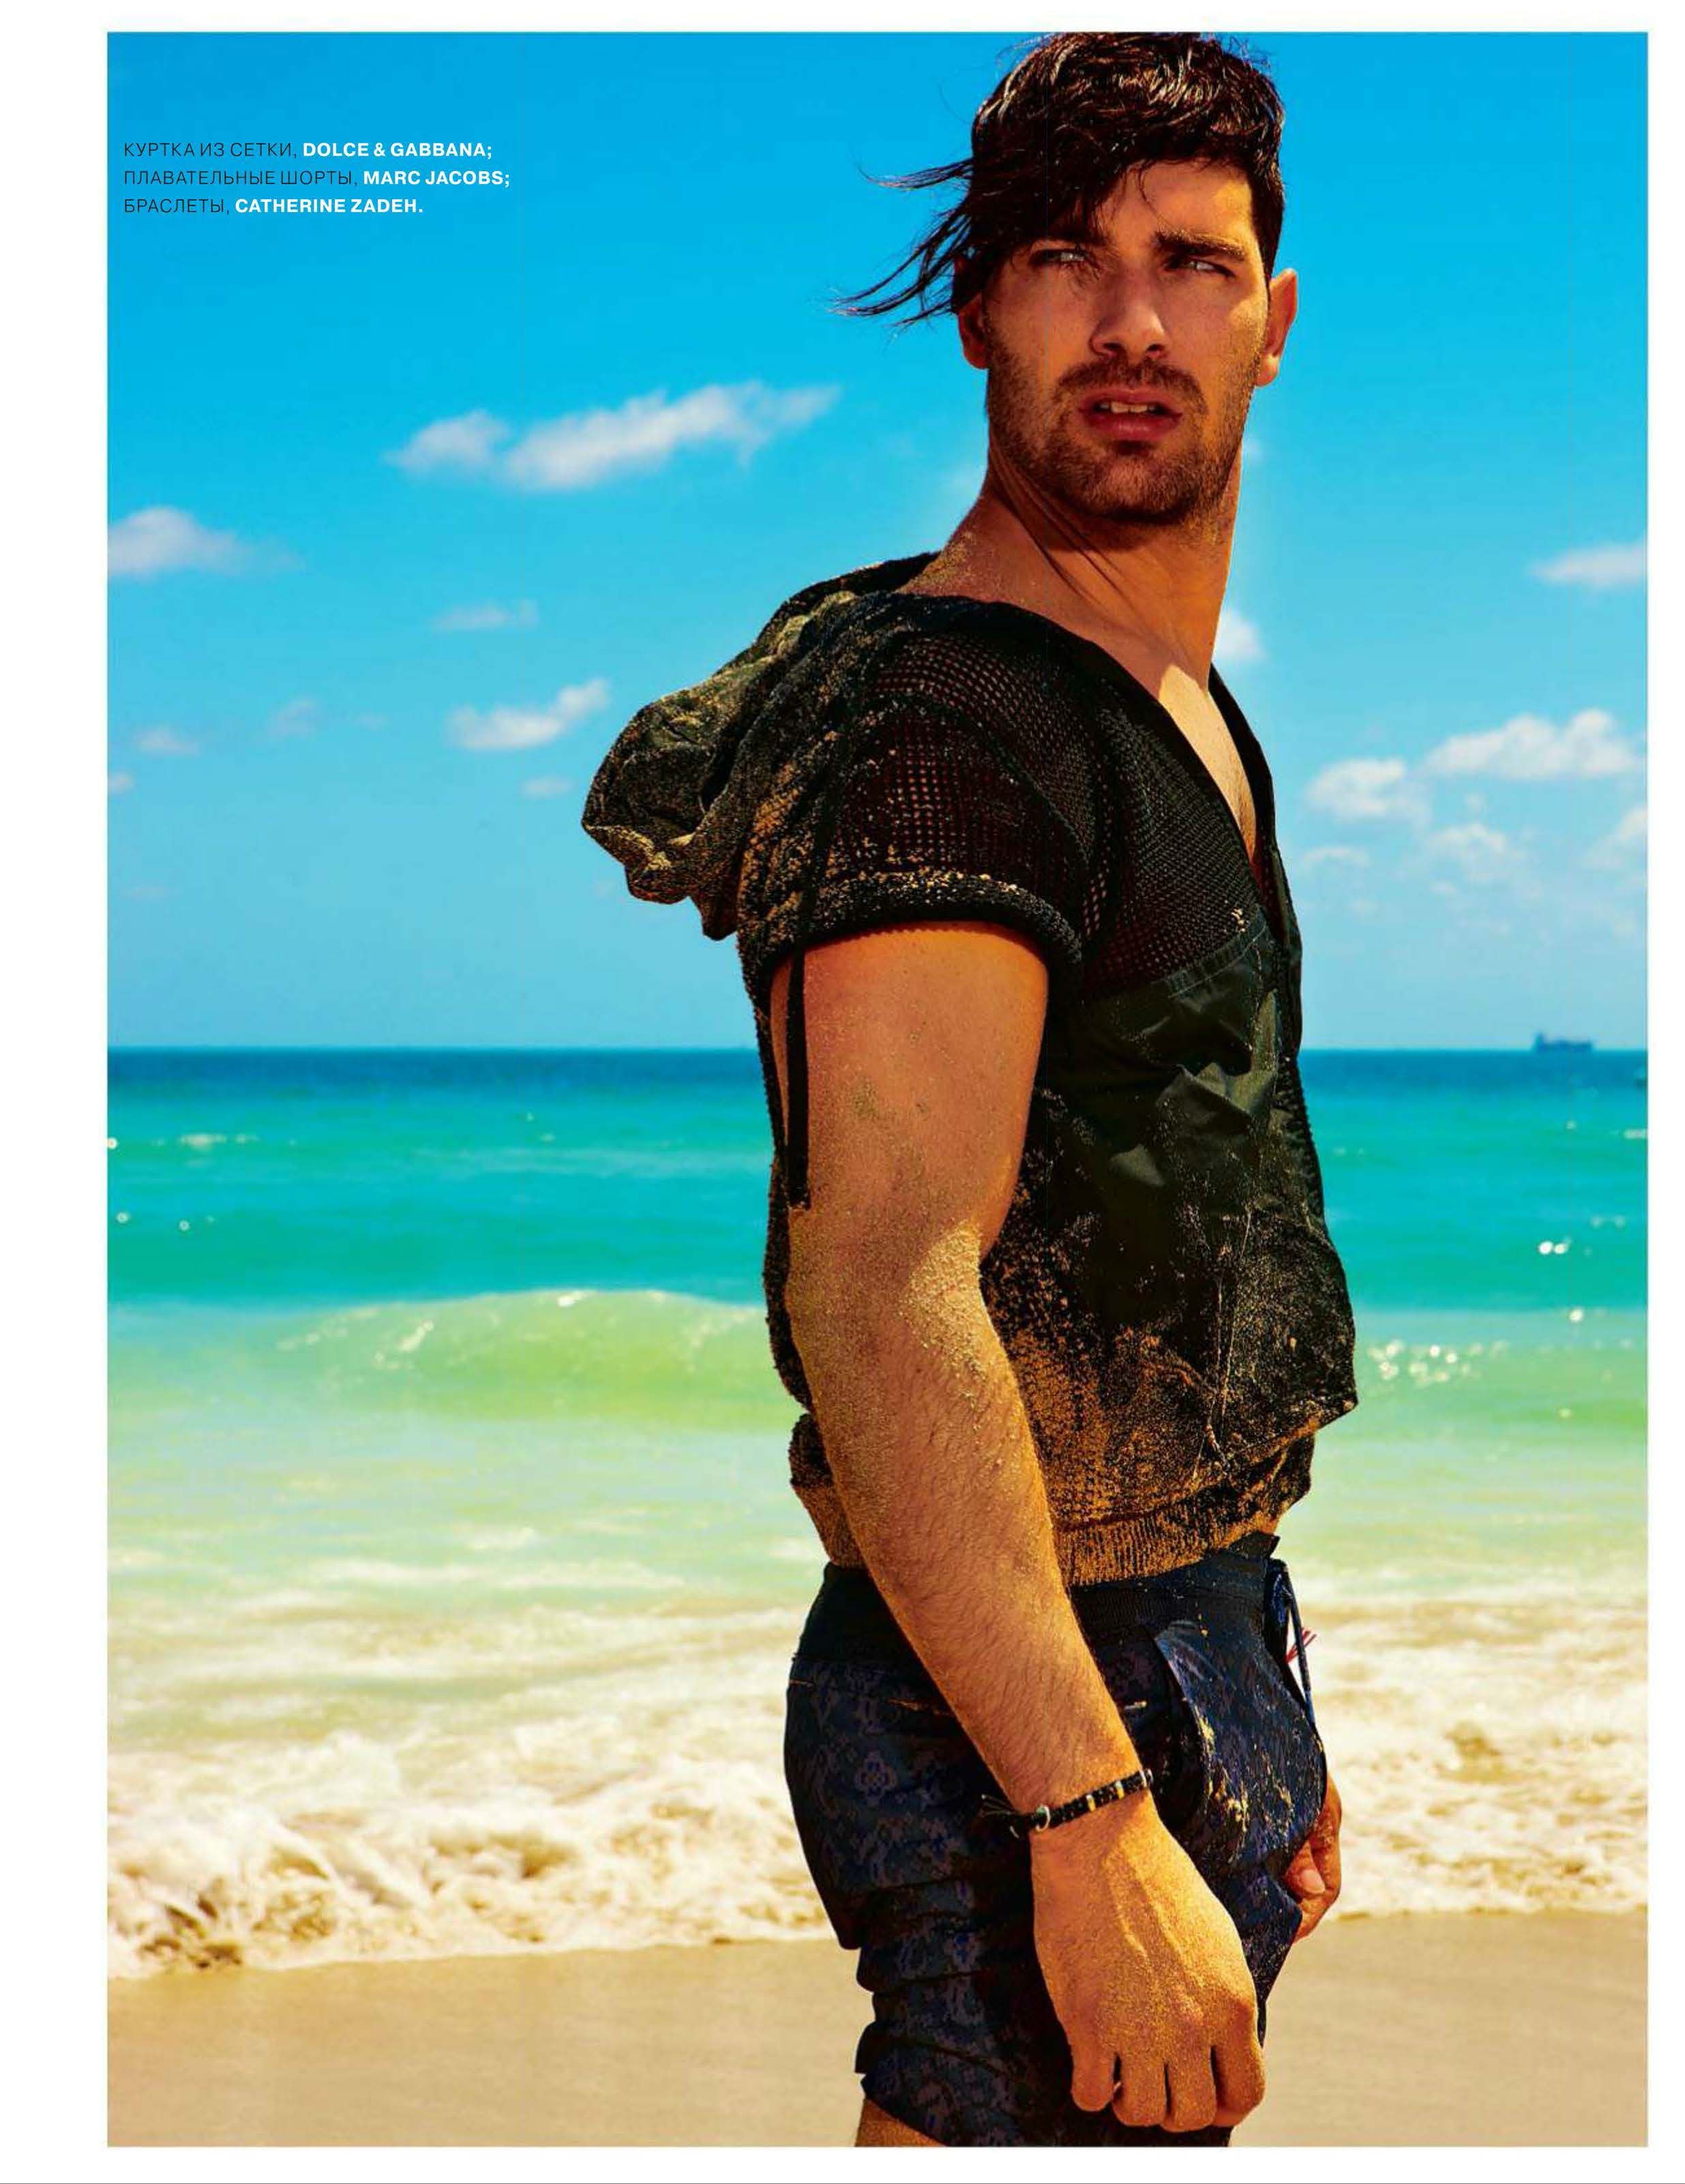 Cory Bond is the King of the Beach for Russian GQ